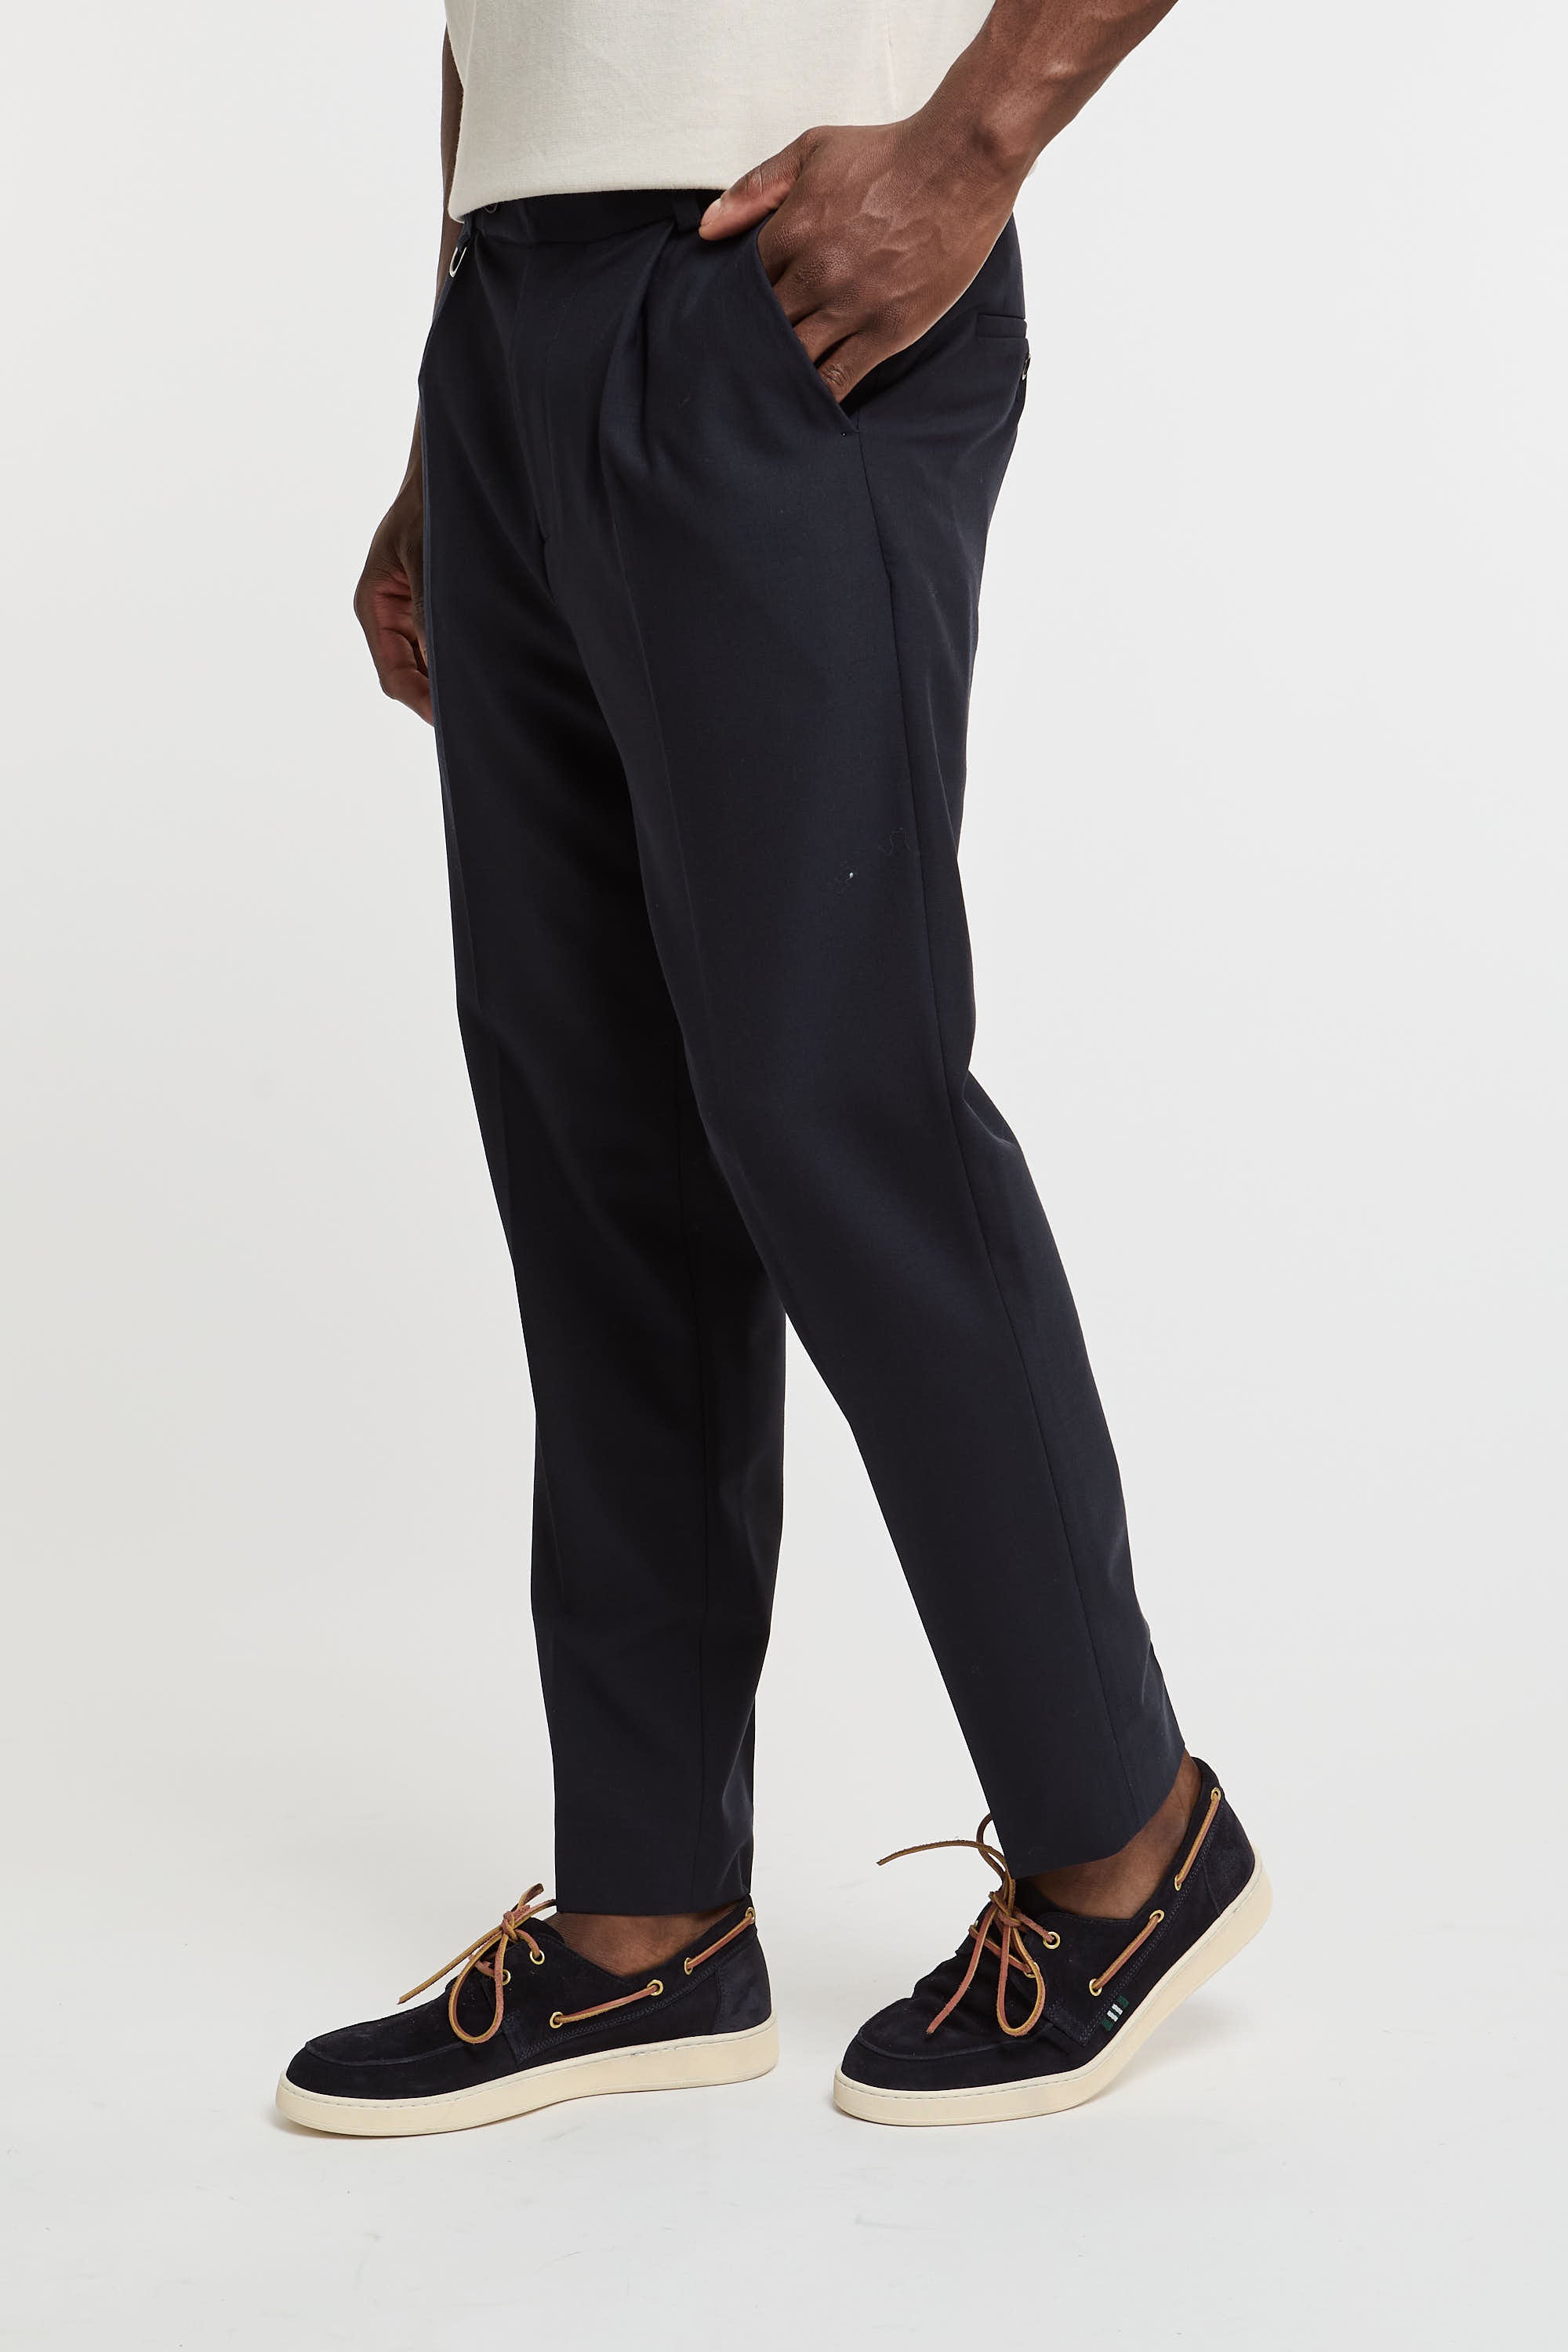 Paolo Pecora Wool/Polyester/Elastane Blue Trousers-4